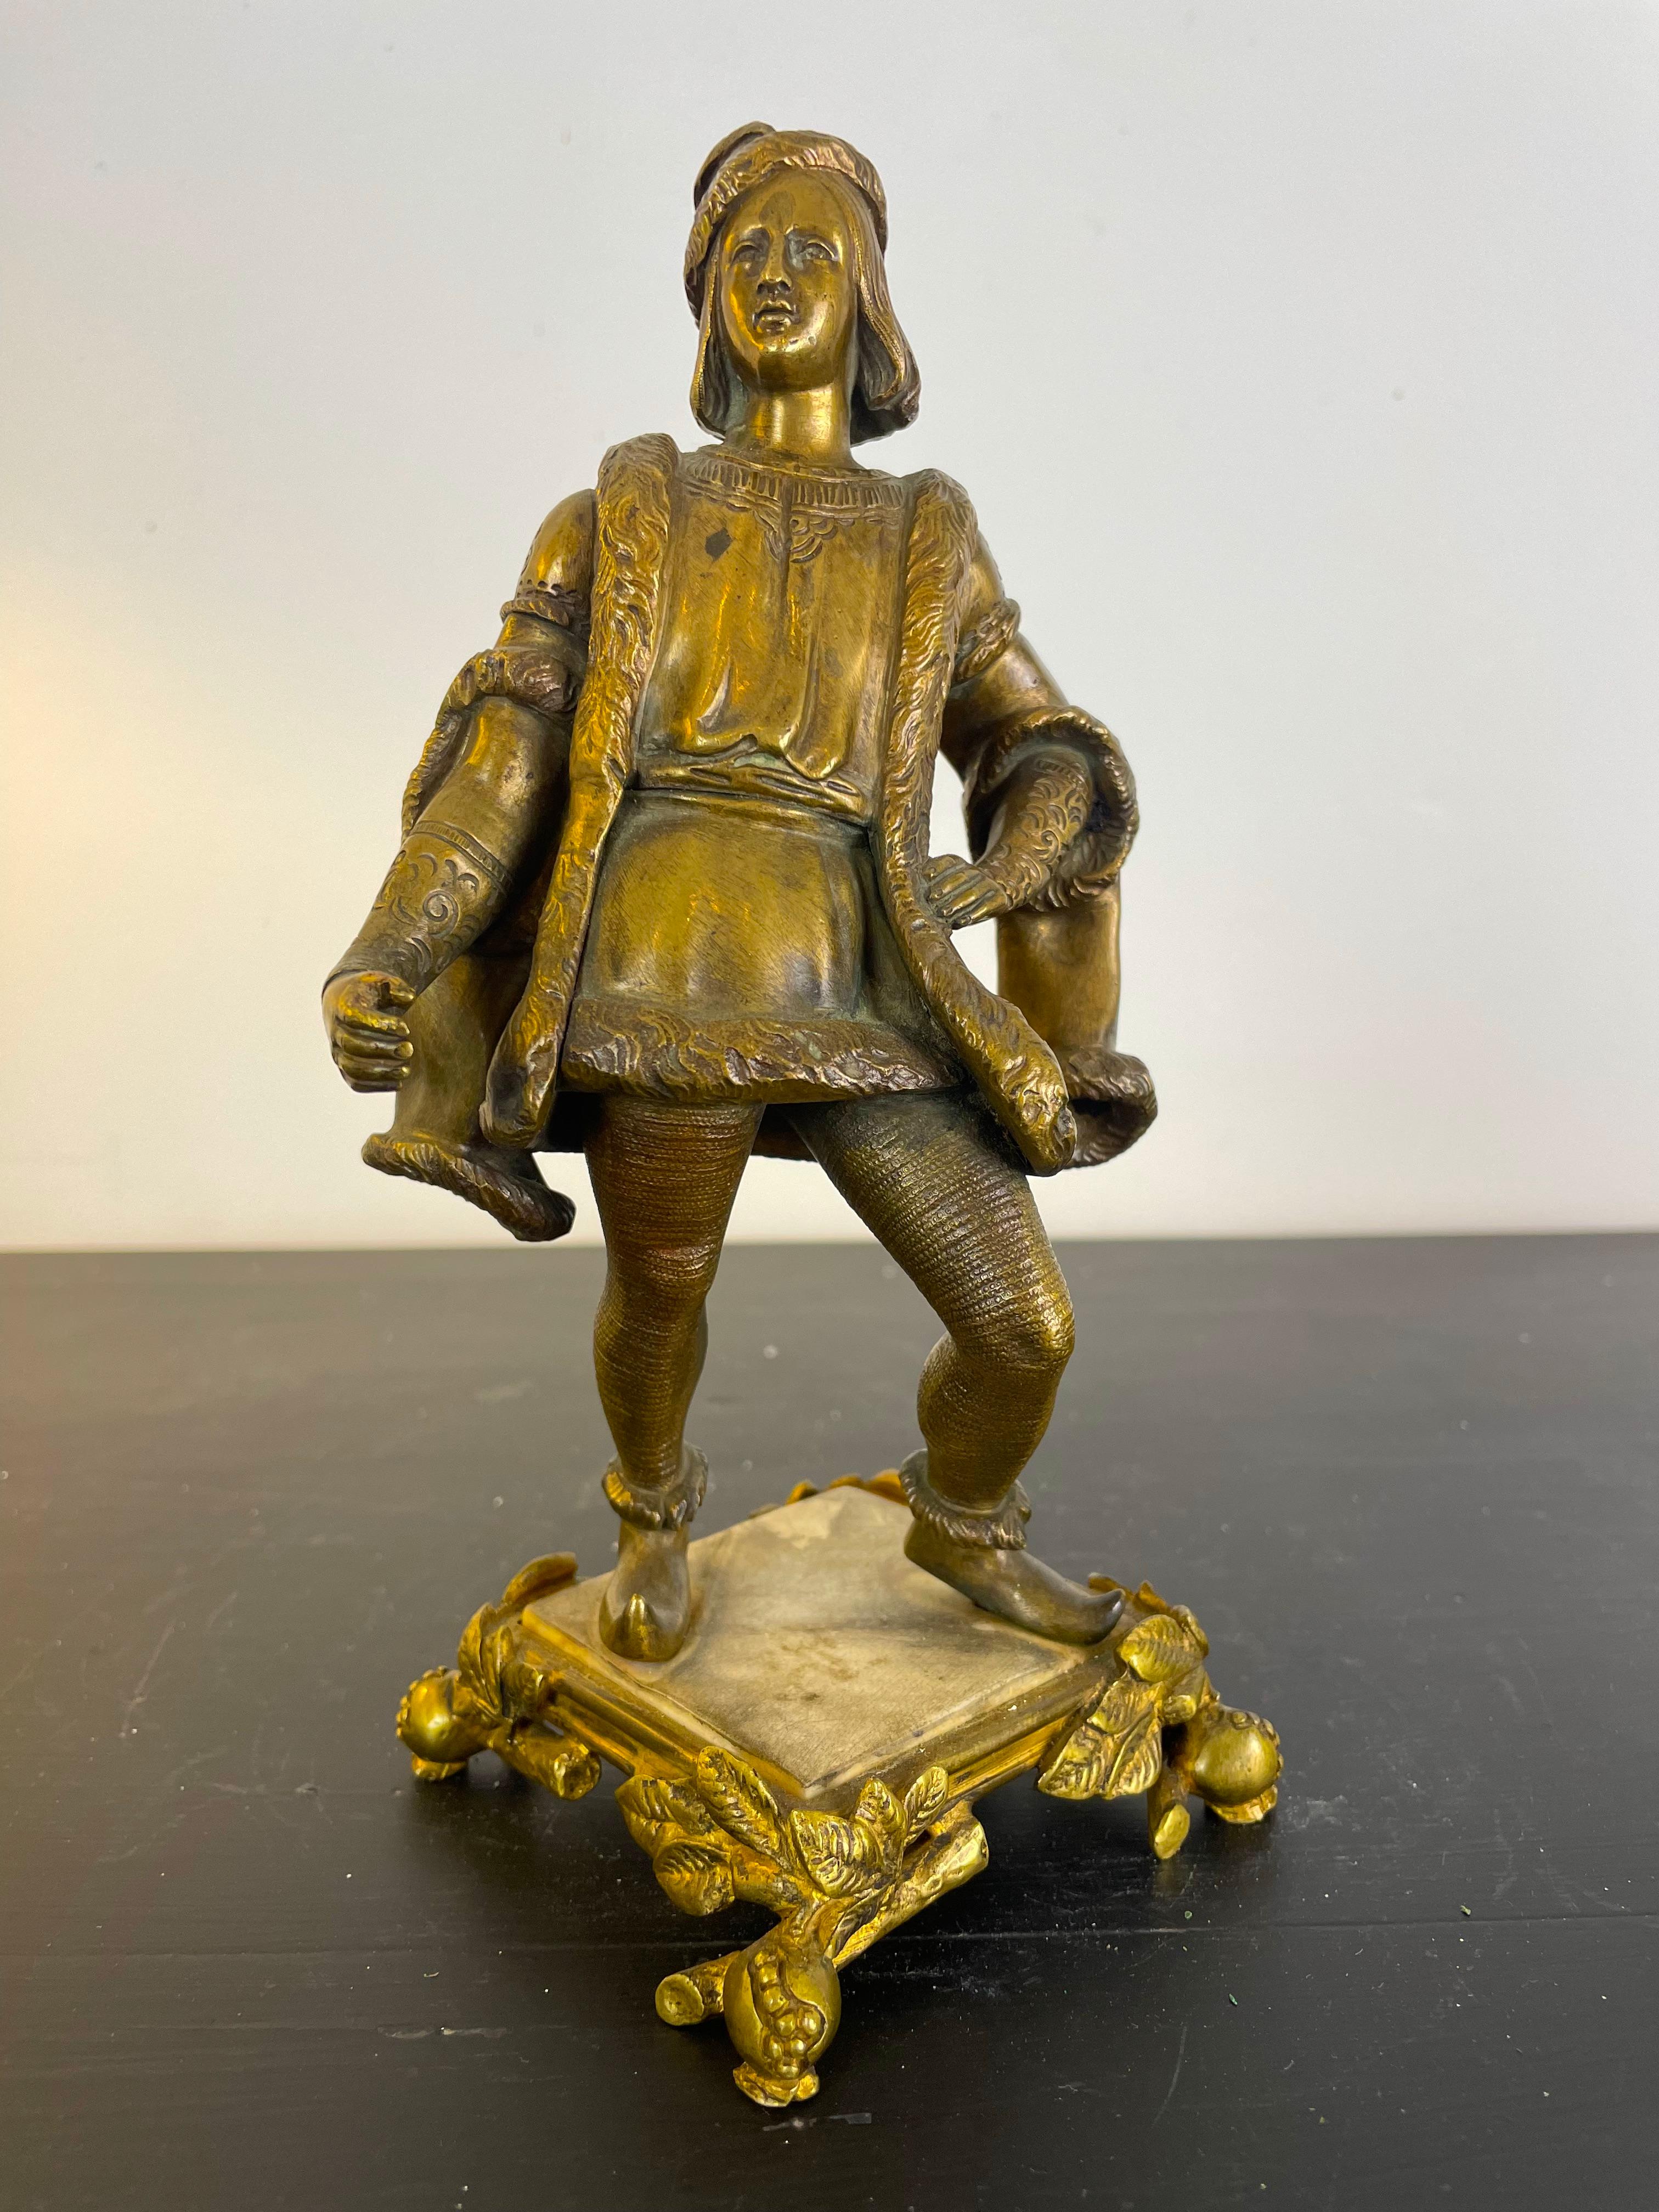 Gilded bronze sculpture representing a gallant young man in Renaissance costume, in the style of the French King Henry IV. He is dressed in a doublet for the top, and over that he wears a casaque-style coat, worn wide open, which has short puffed